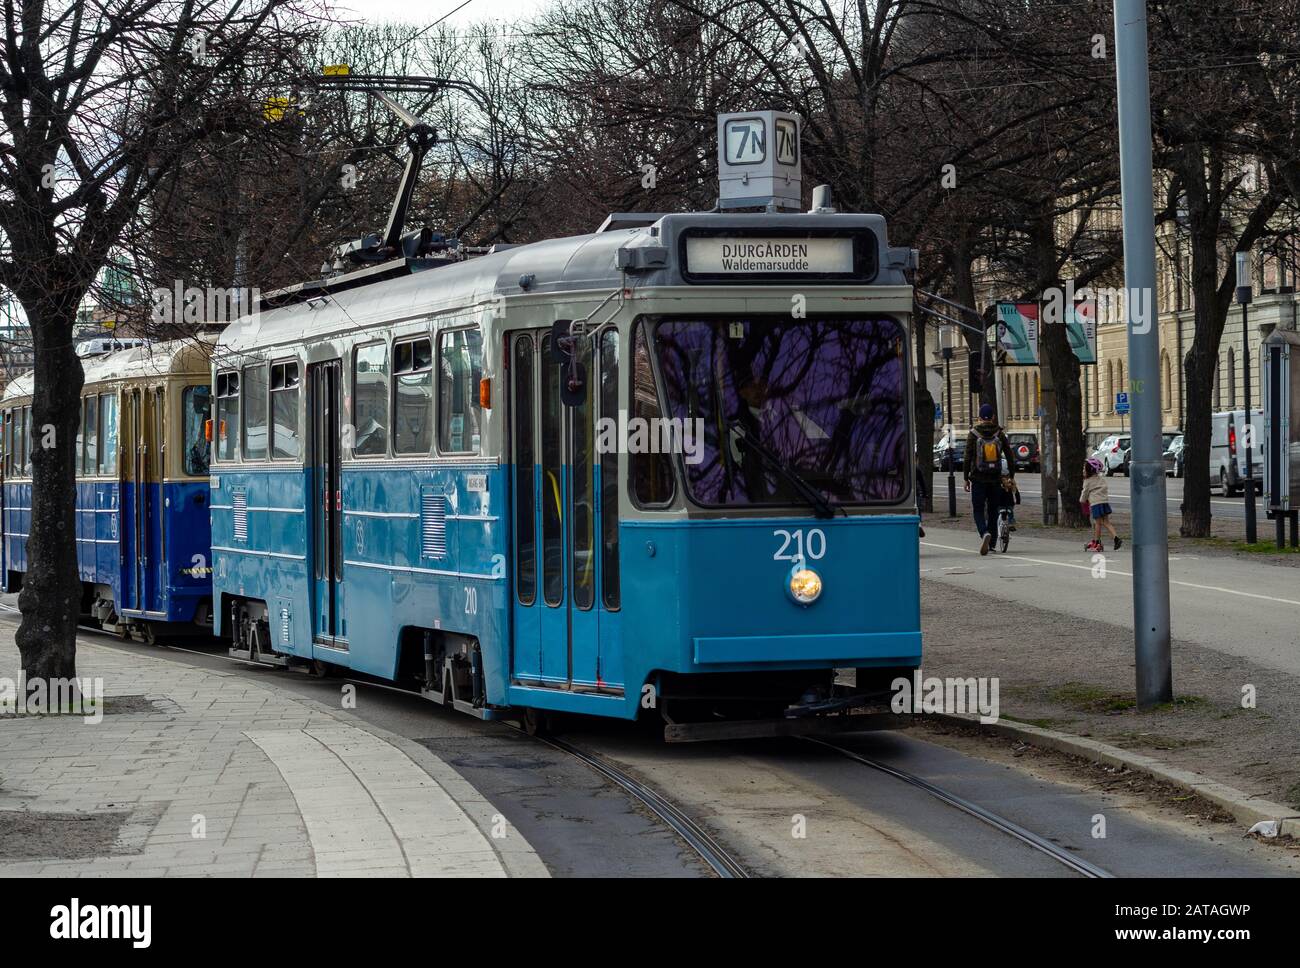 April 22, 2018, Stockholm, Sweden. Blue tram on one of the streets of Stockholm in spring clear weather. Stock Photo